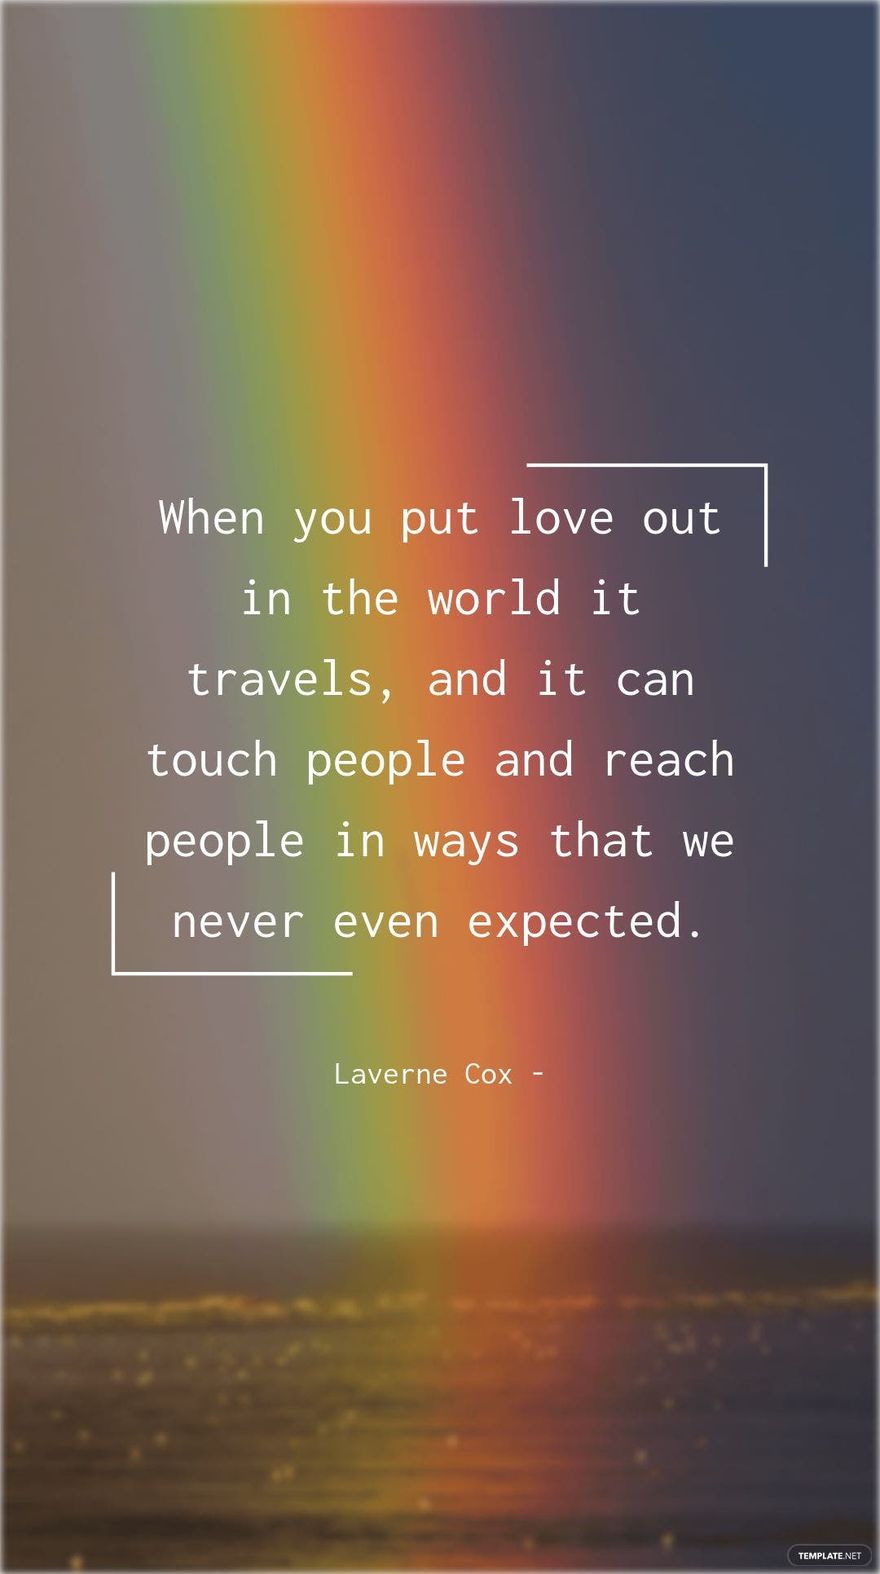 Free Laverne Cox - When you put love out in the world it travels, and it can touch people and reach people in ways that we never even expected. in JPG